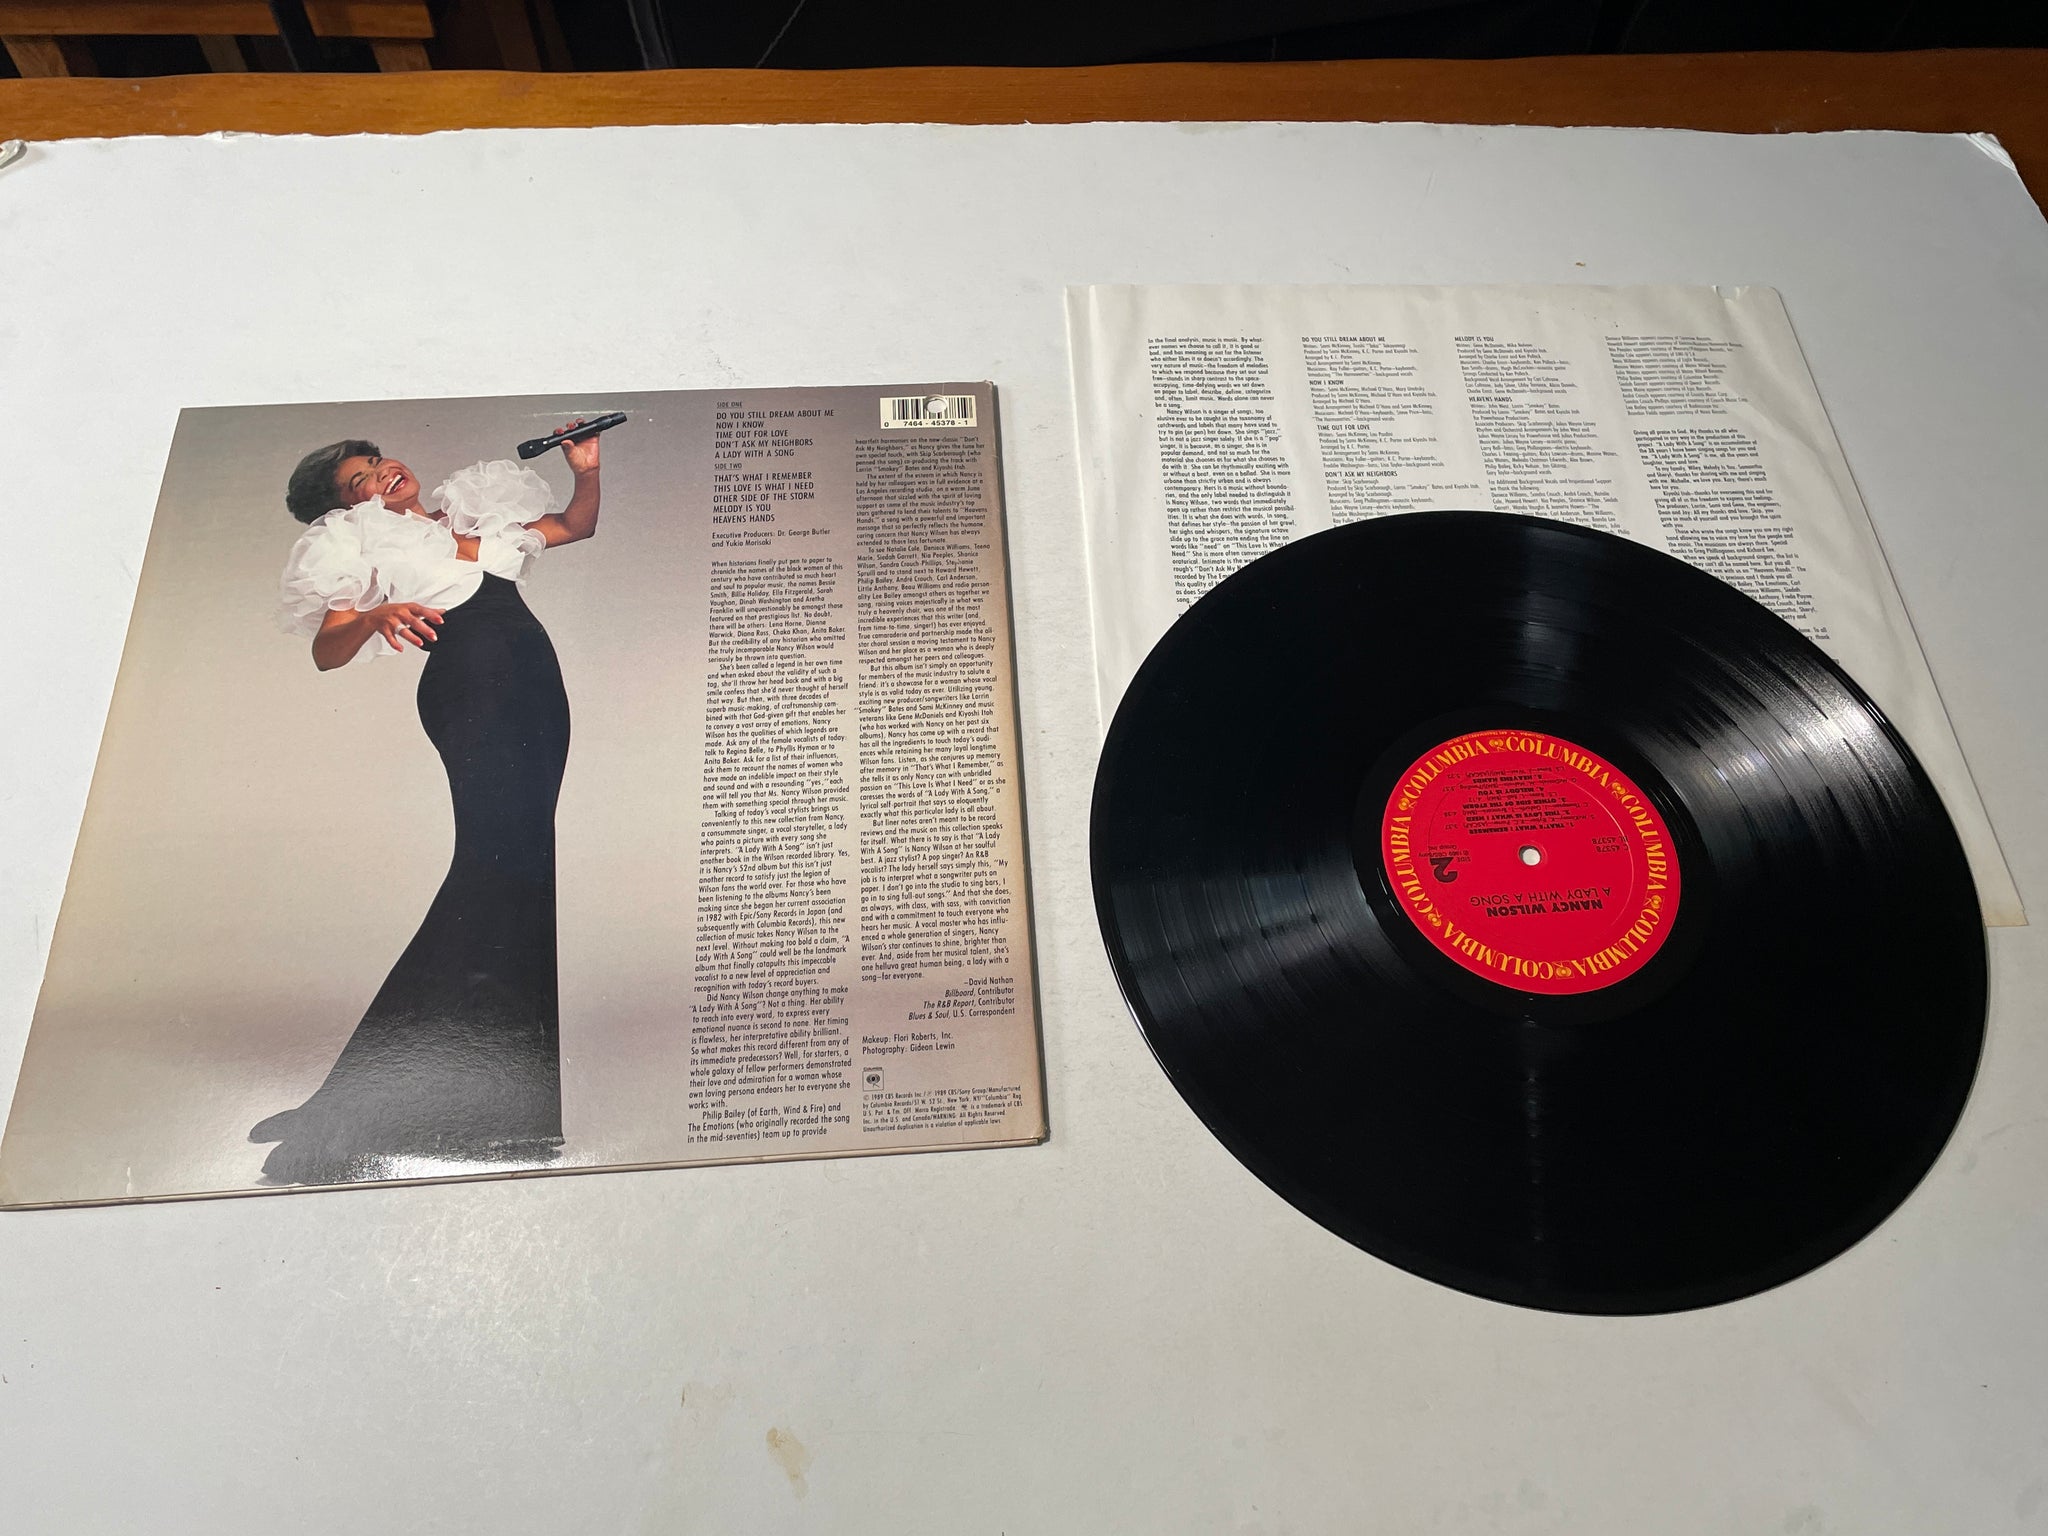 Song　Slow　With　Turnin　A　Used　Nancy　Vinyl　LP　A　Wilson　Vinyl　Lady　VG+\VG